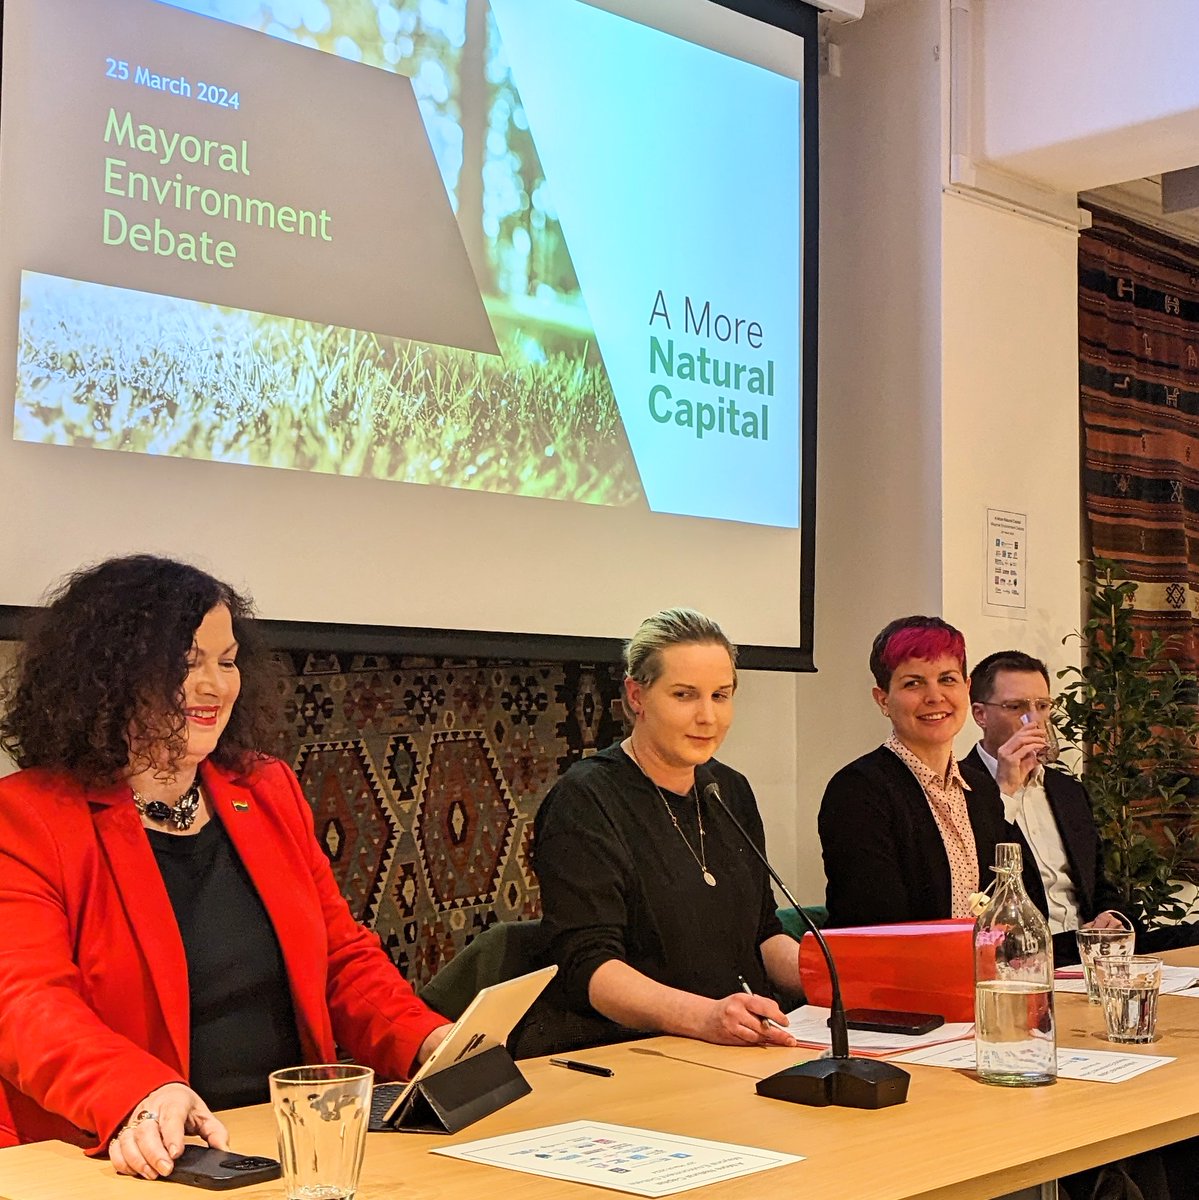 Live from the Mayoral Environmental Debate, four candidates and representatives of the main parties discussing how each campaign might make London greener, healthier, and wilder. #amorenaturalcapital #dolondondifferently #nationalparkcity